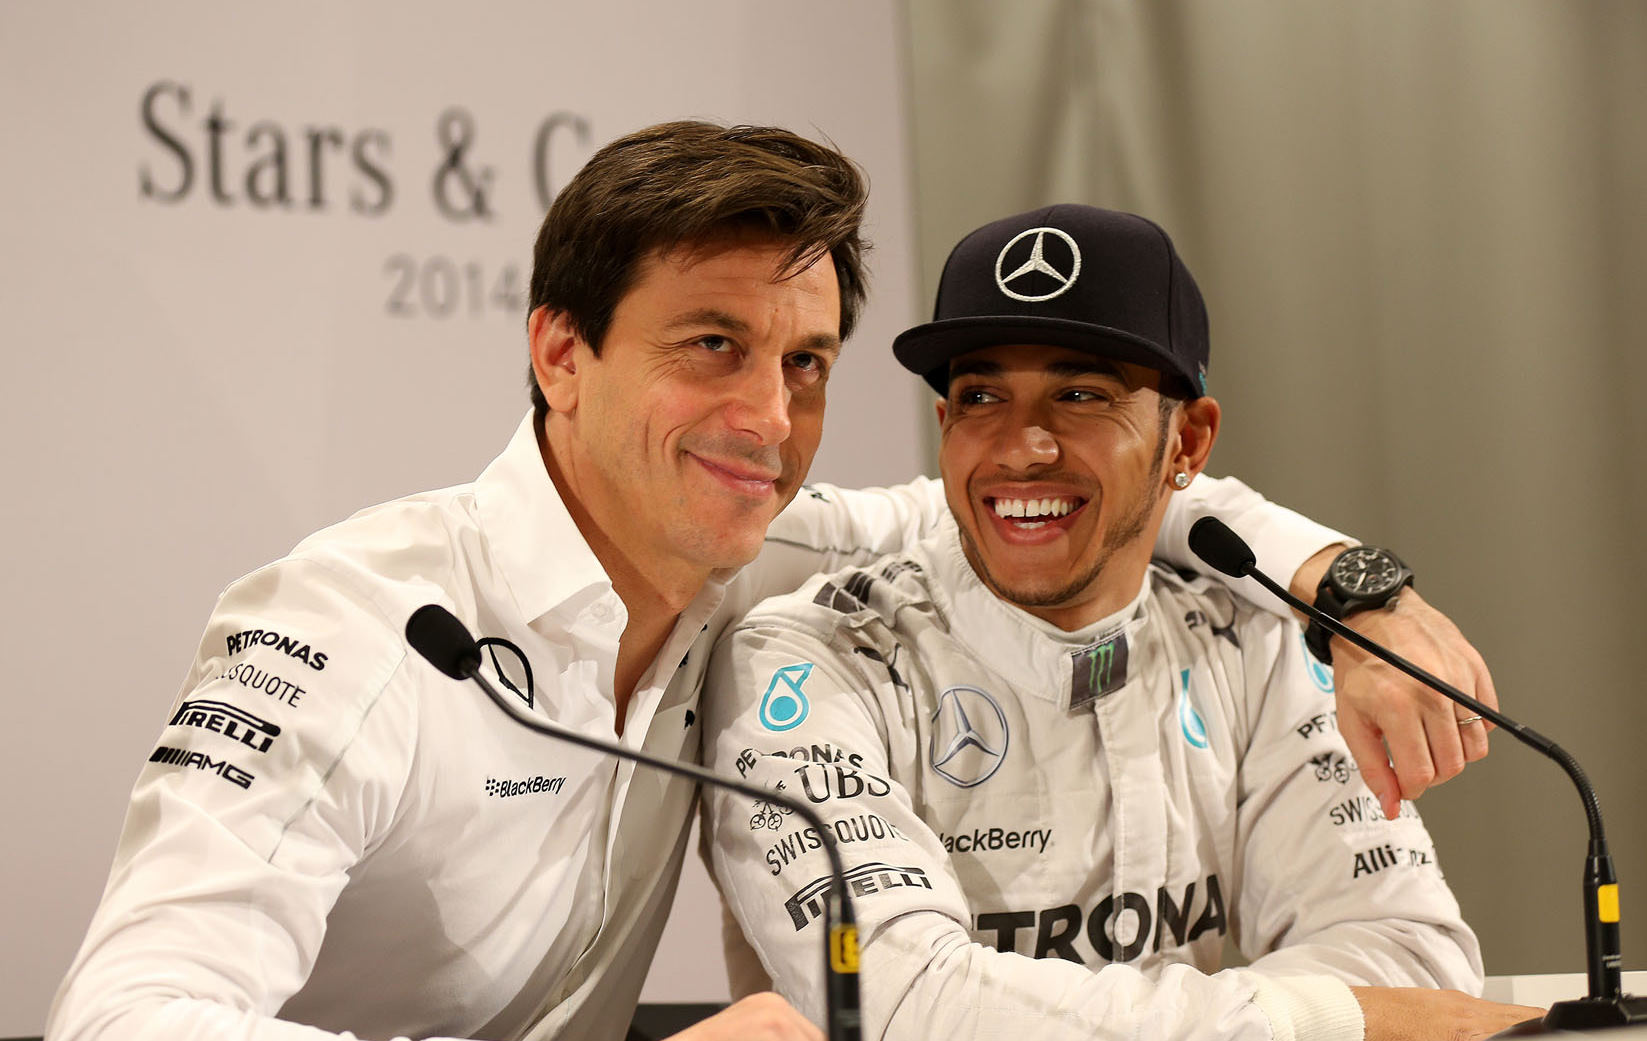 Wolff whispers to Hamilton, you know you would be nothing without us giving you an unbeatable car, right?